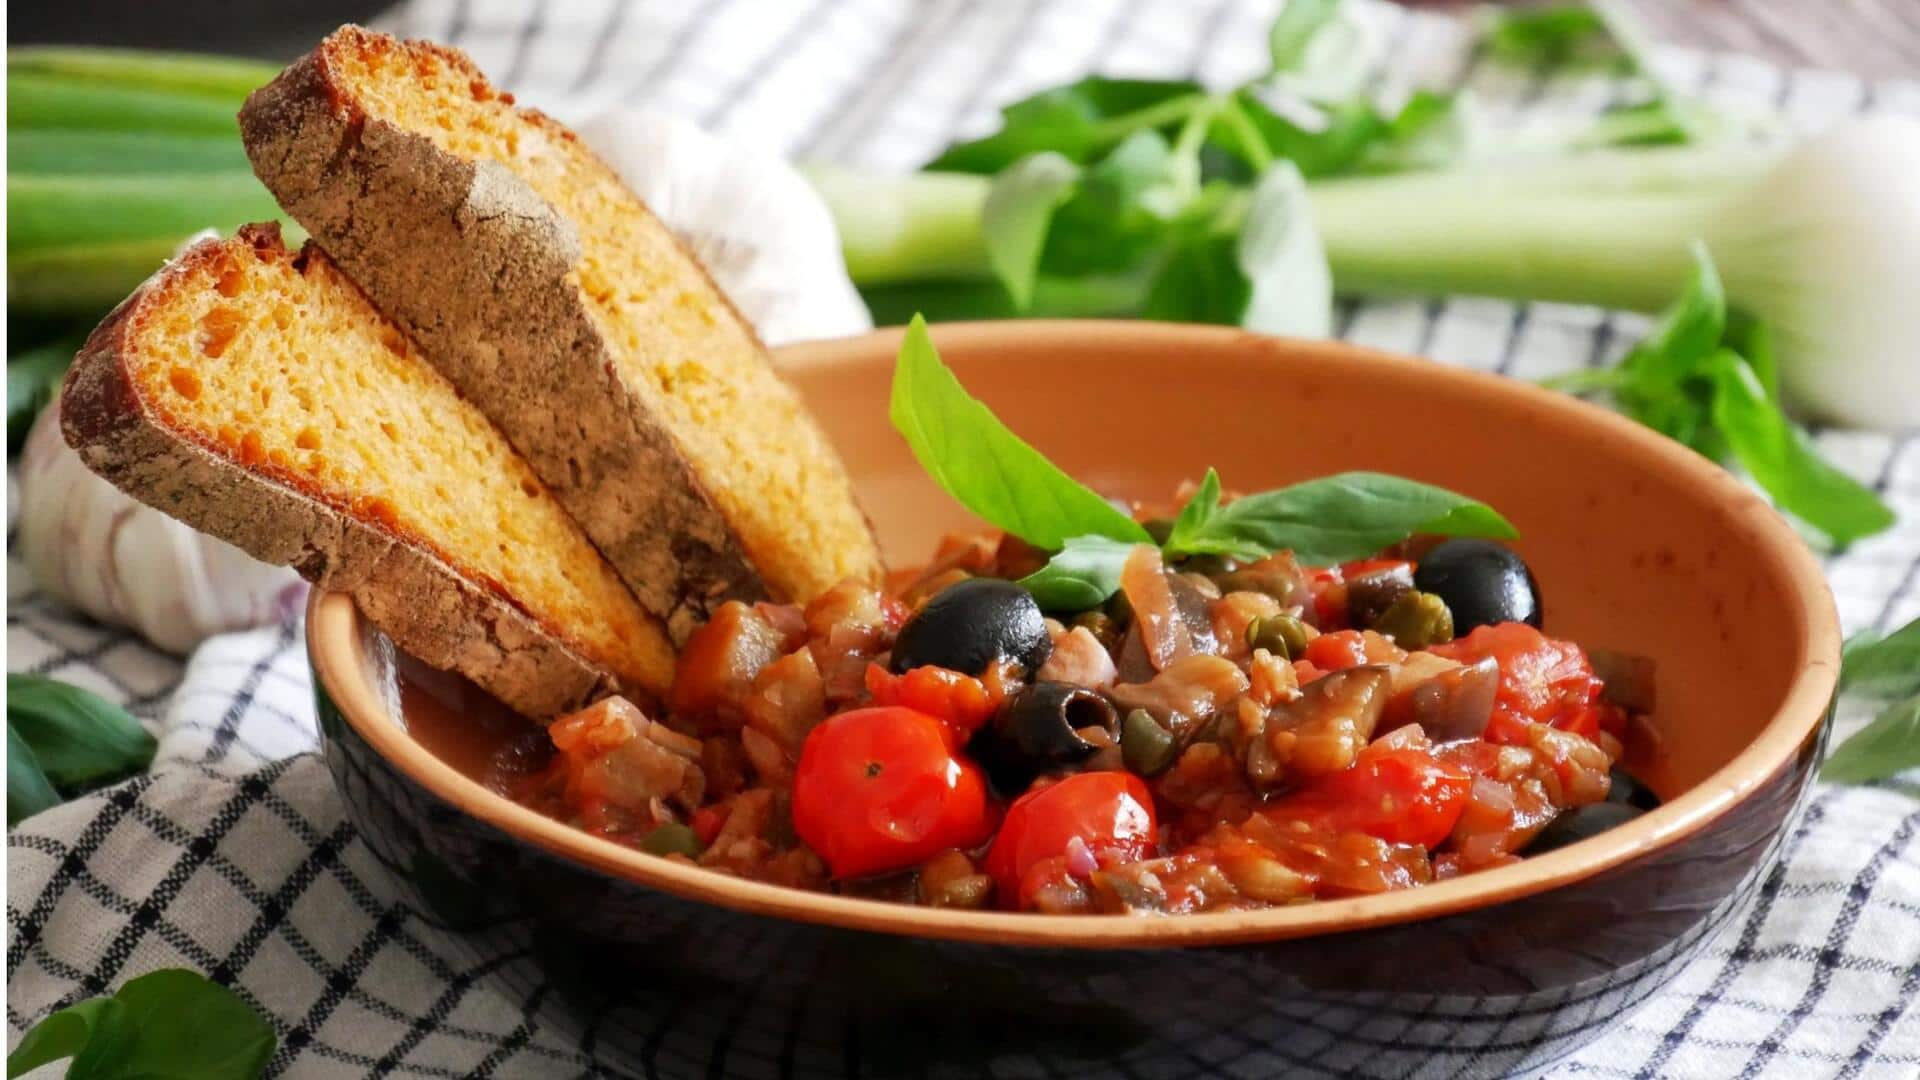 Sicily on your plate: Try this delicious caponata recipe